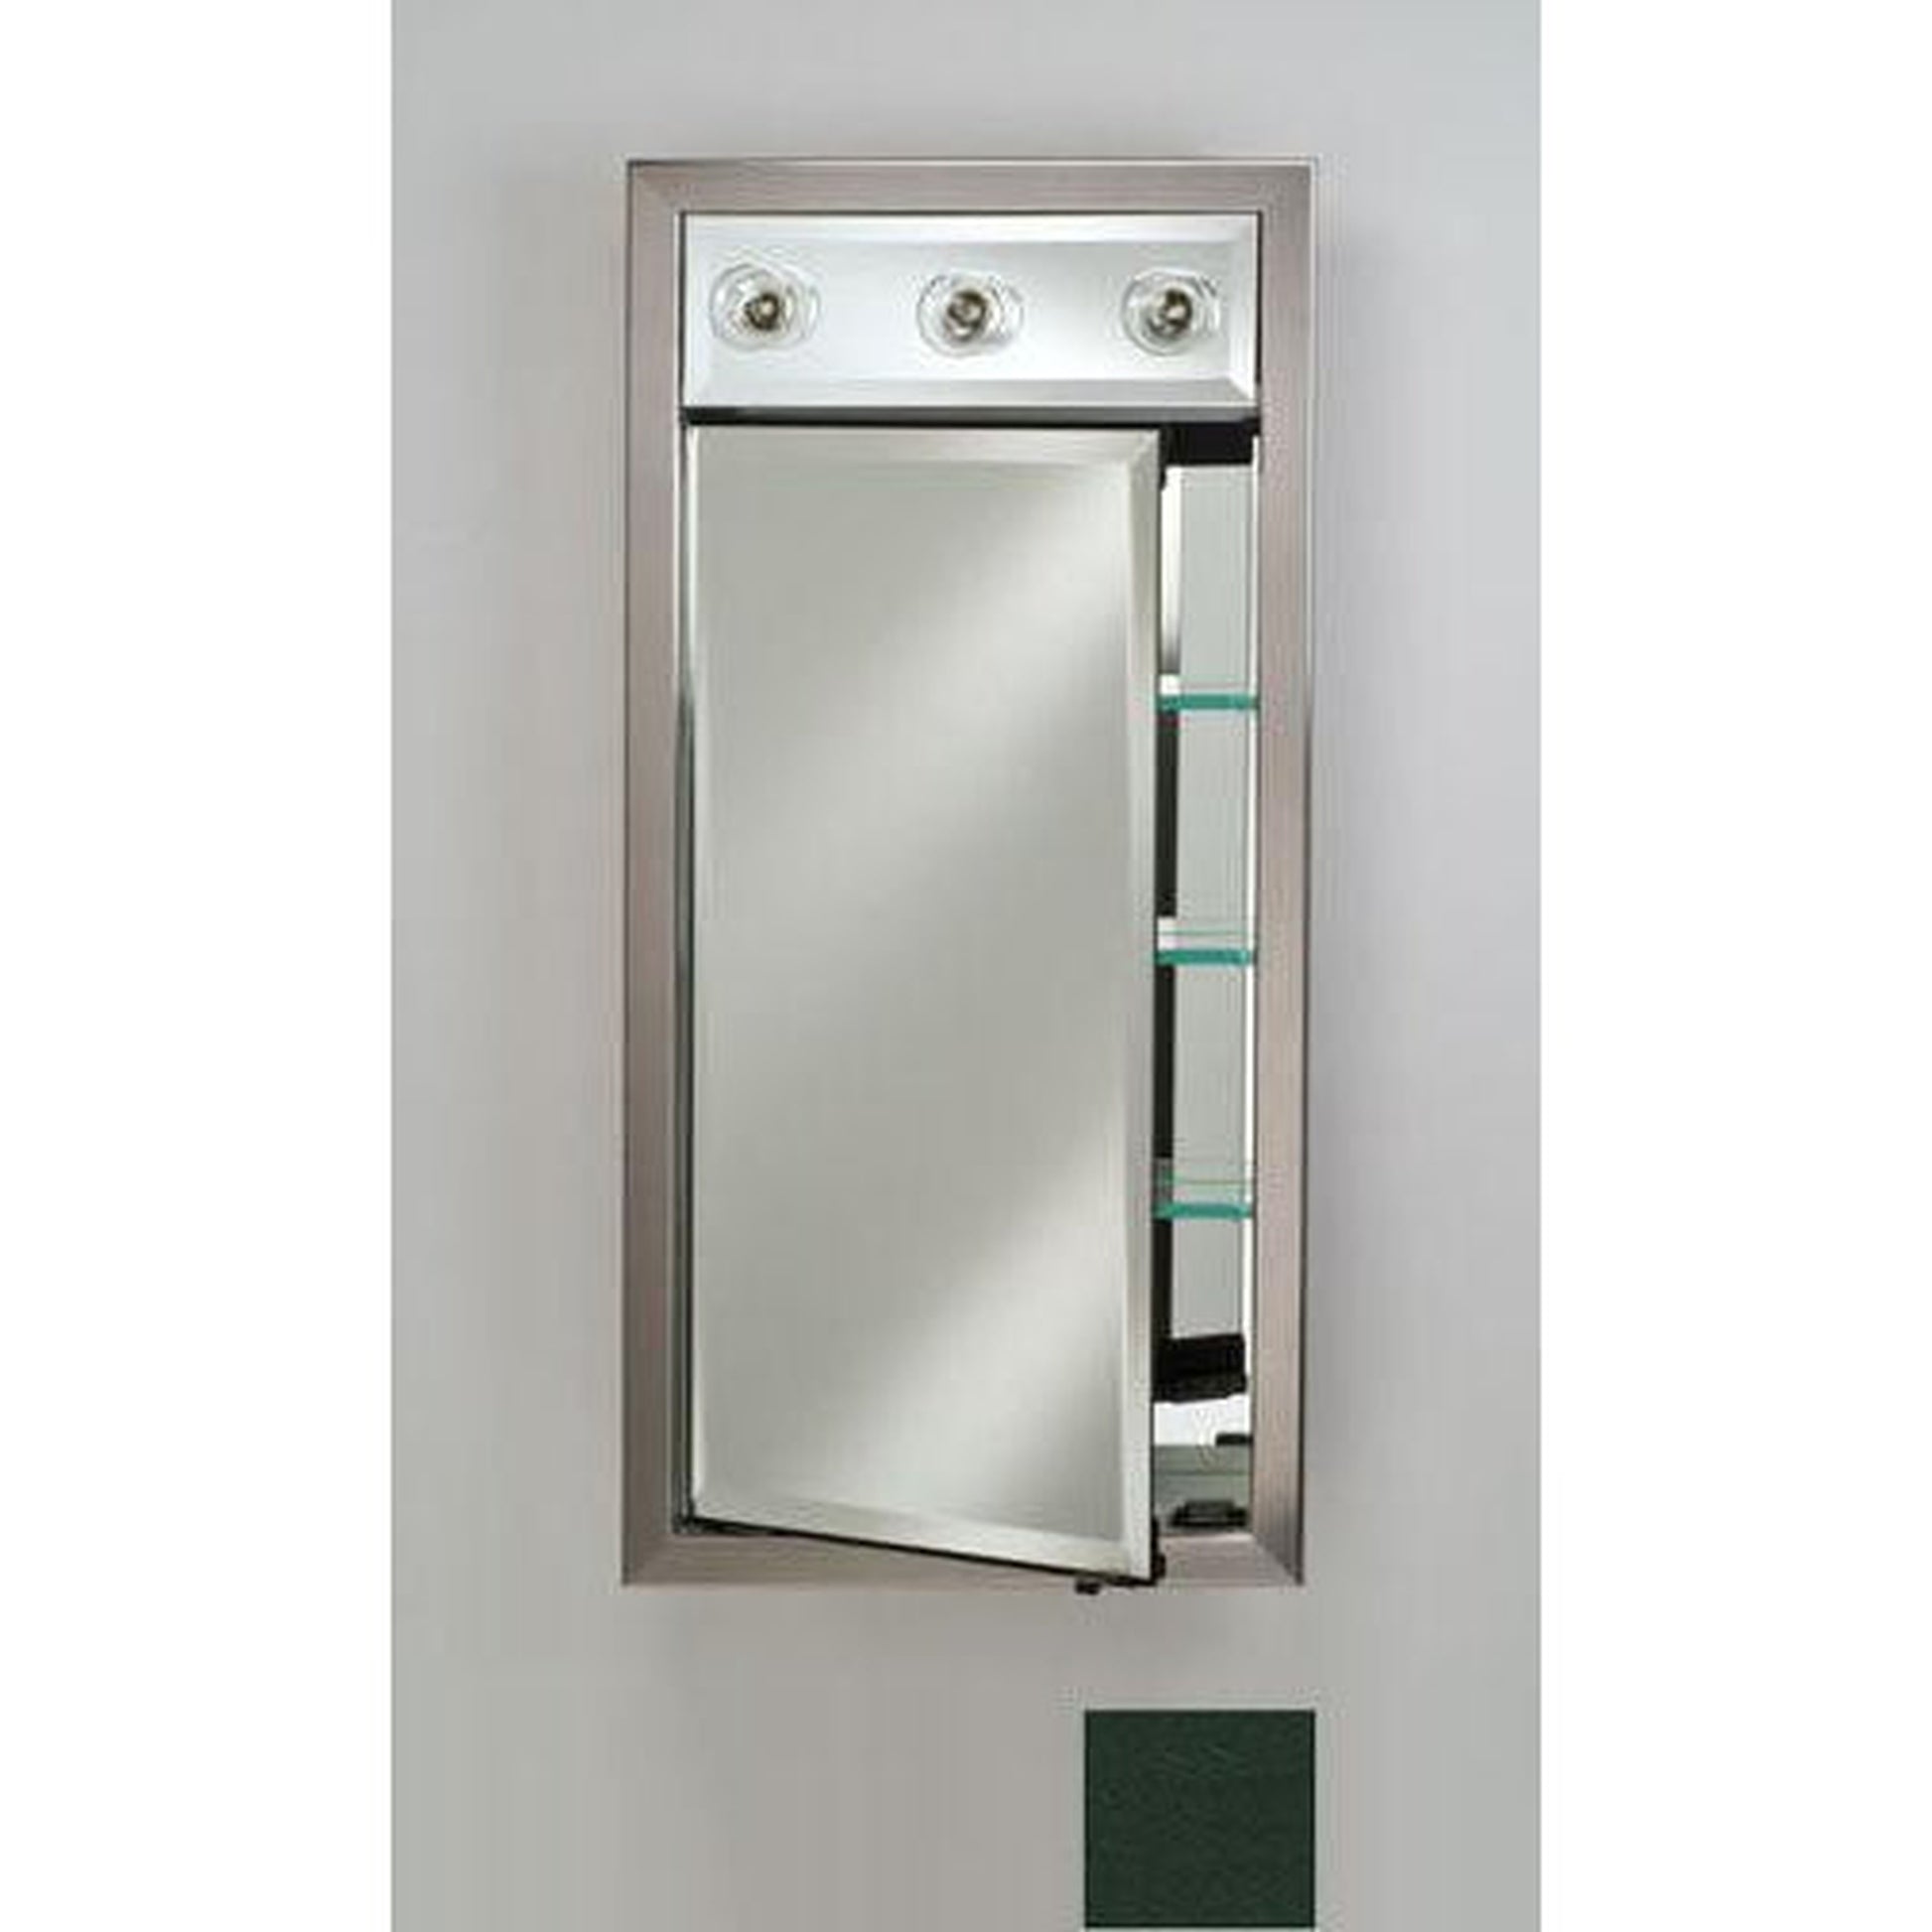 Afina Signature 17" x 30" Colorgrain Green Recessed Left Hinged Single Door Medicine Cabinet With Contemporary Lights